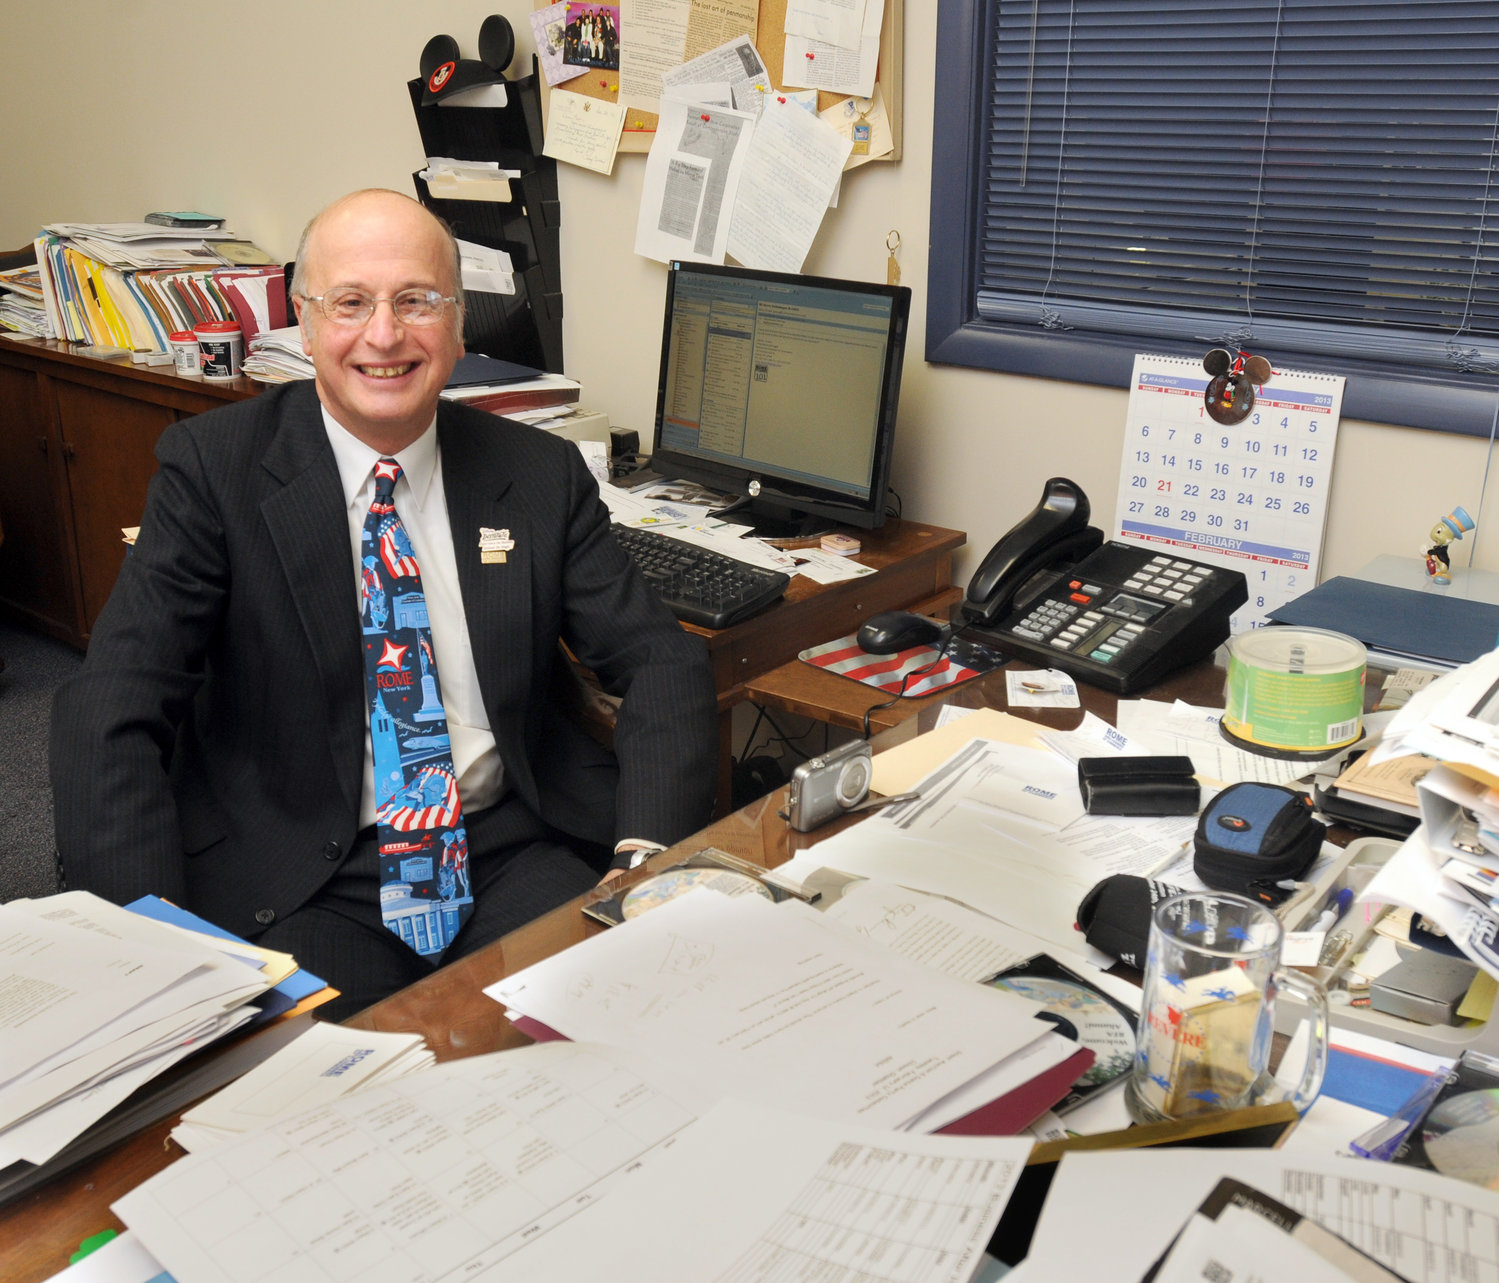 Bill Guglielmo in his office at the Rome Area Chamber of Commerce.